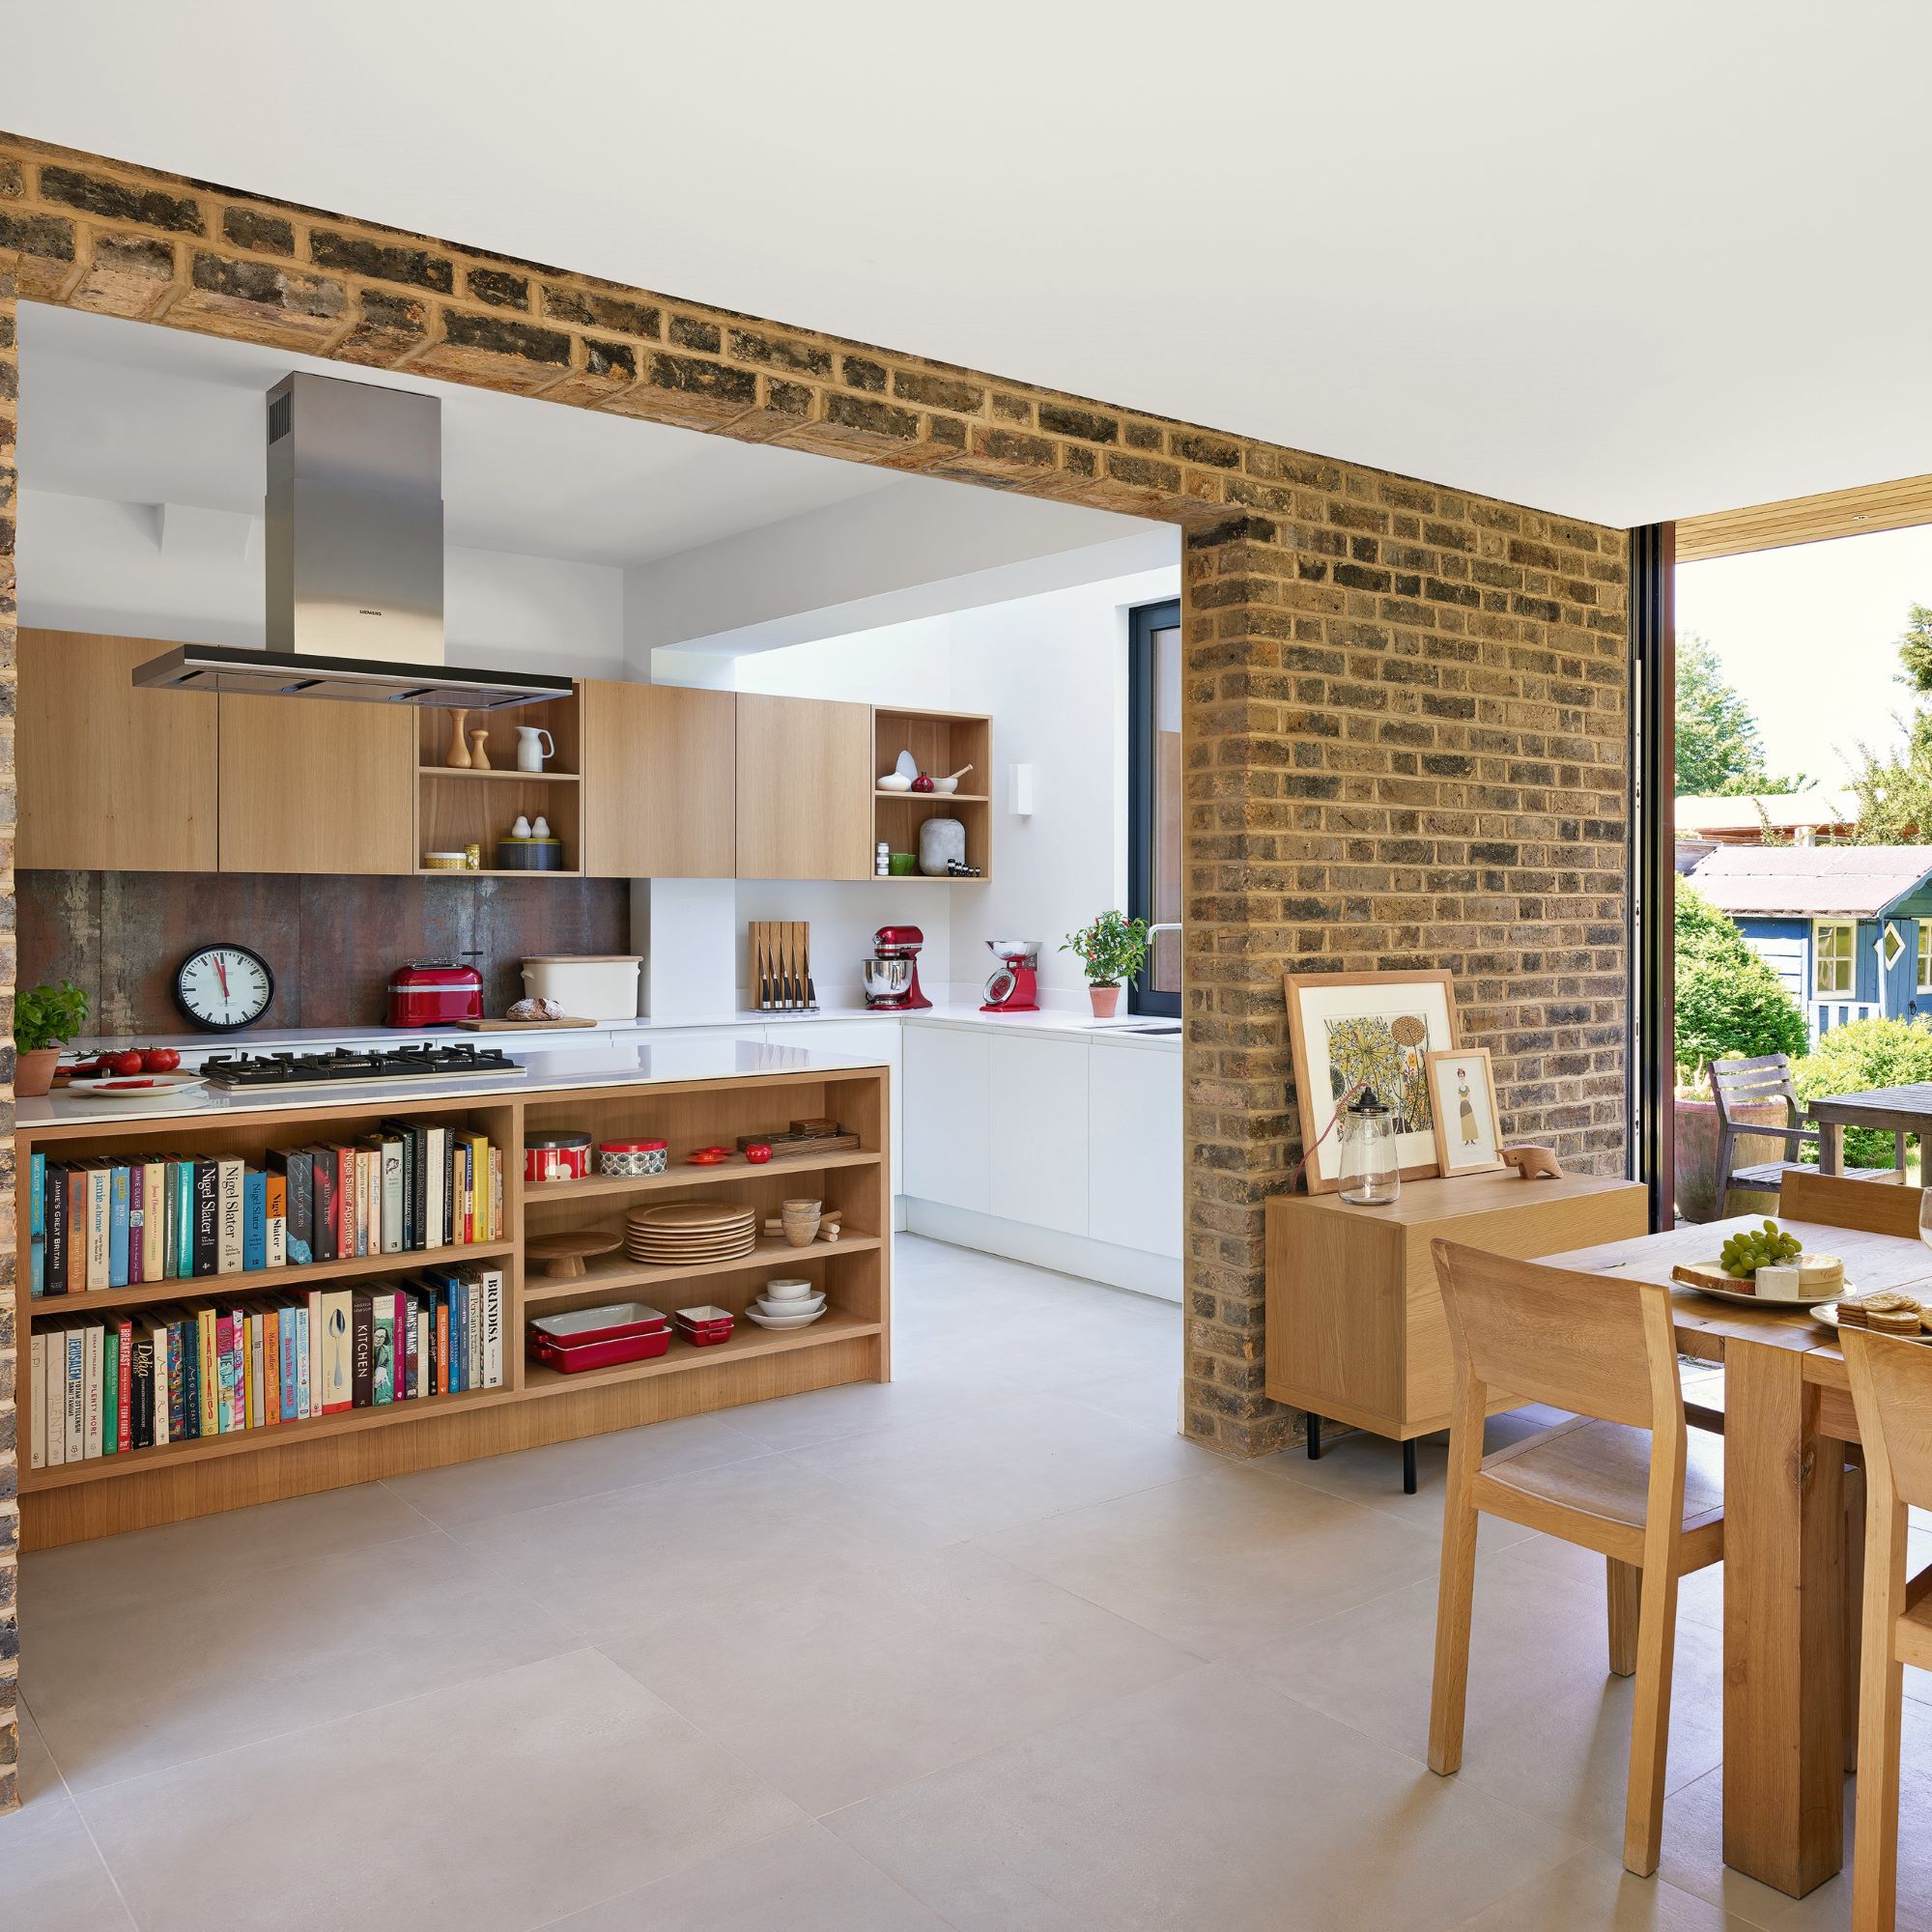 Open plan kitchen with wooden furniture and brick walls